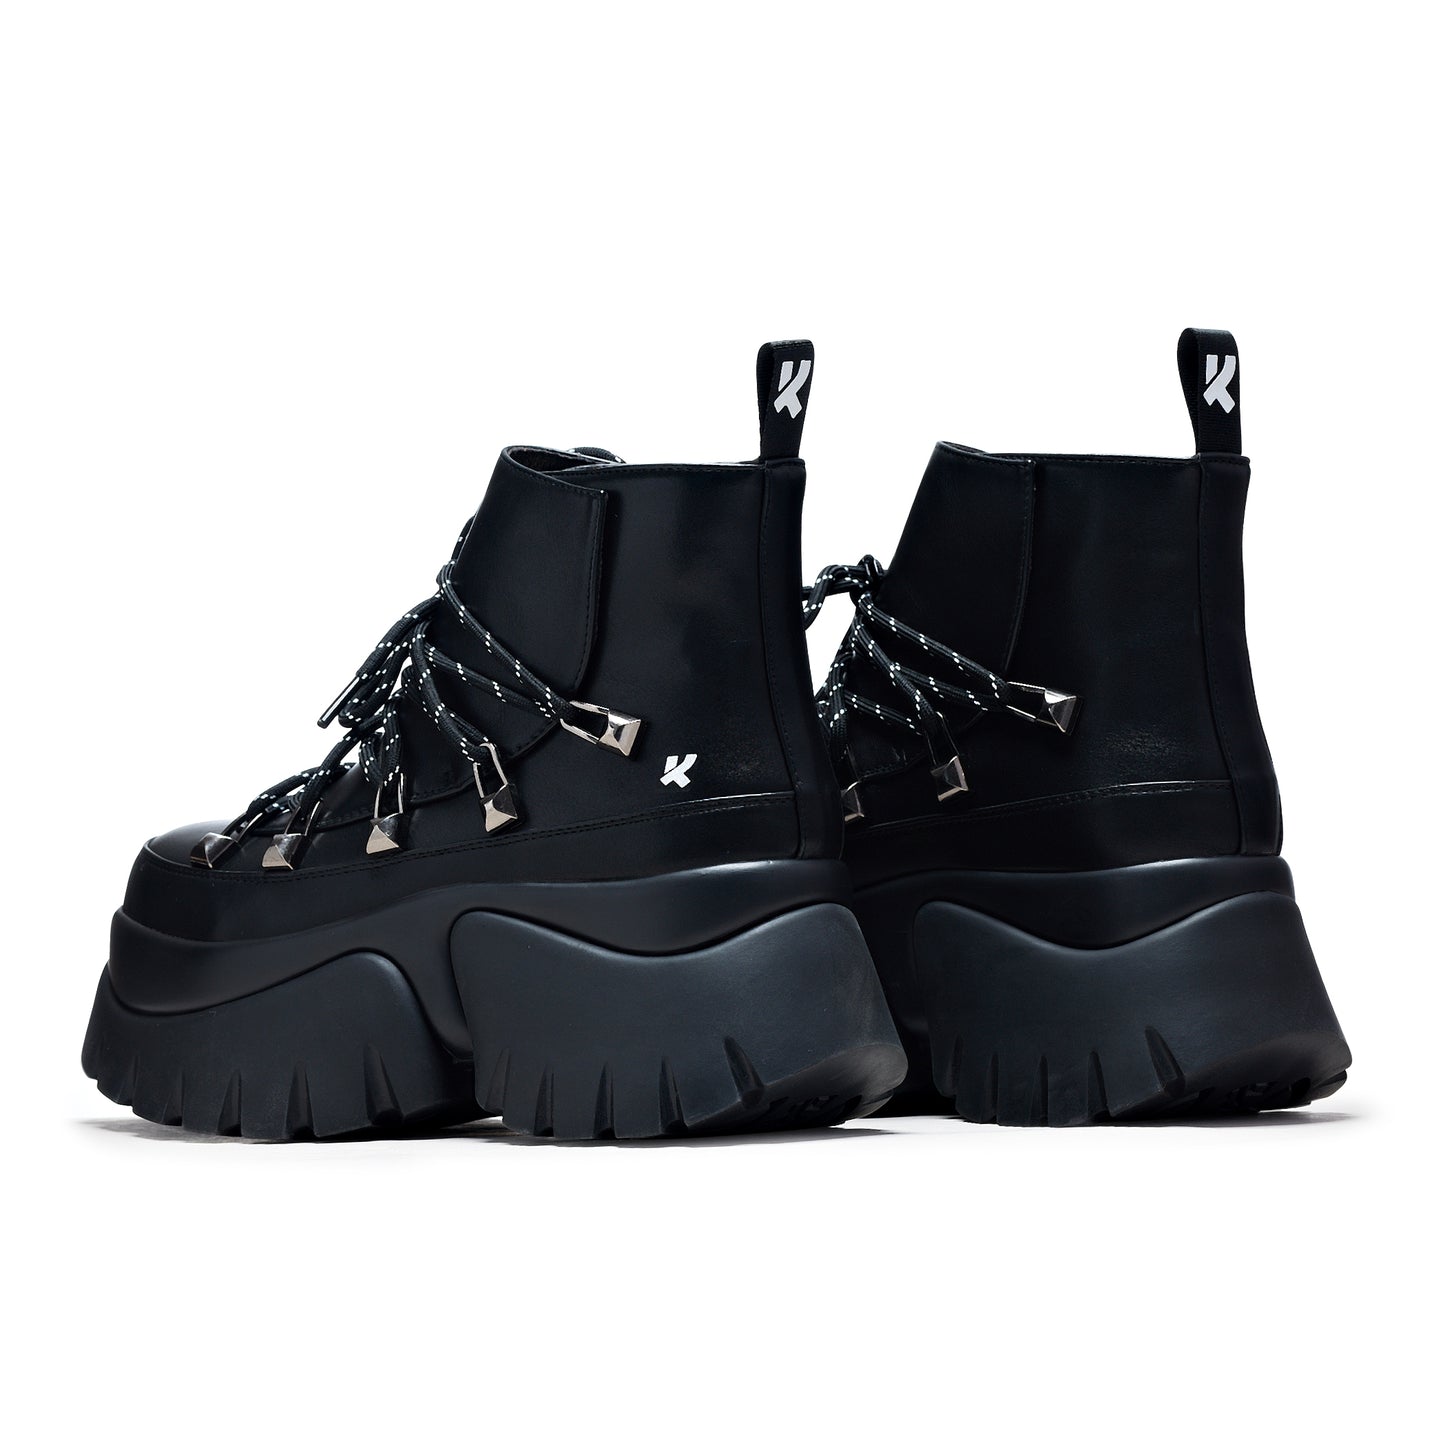 Sigmar Chunky Hiking Boots - Ankle Boots - KOI Footwear - Black - Back View